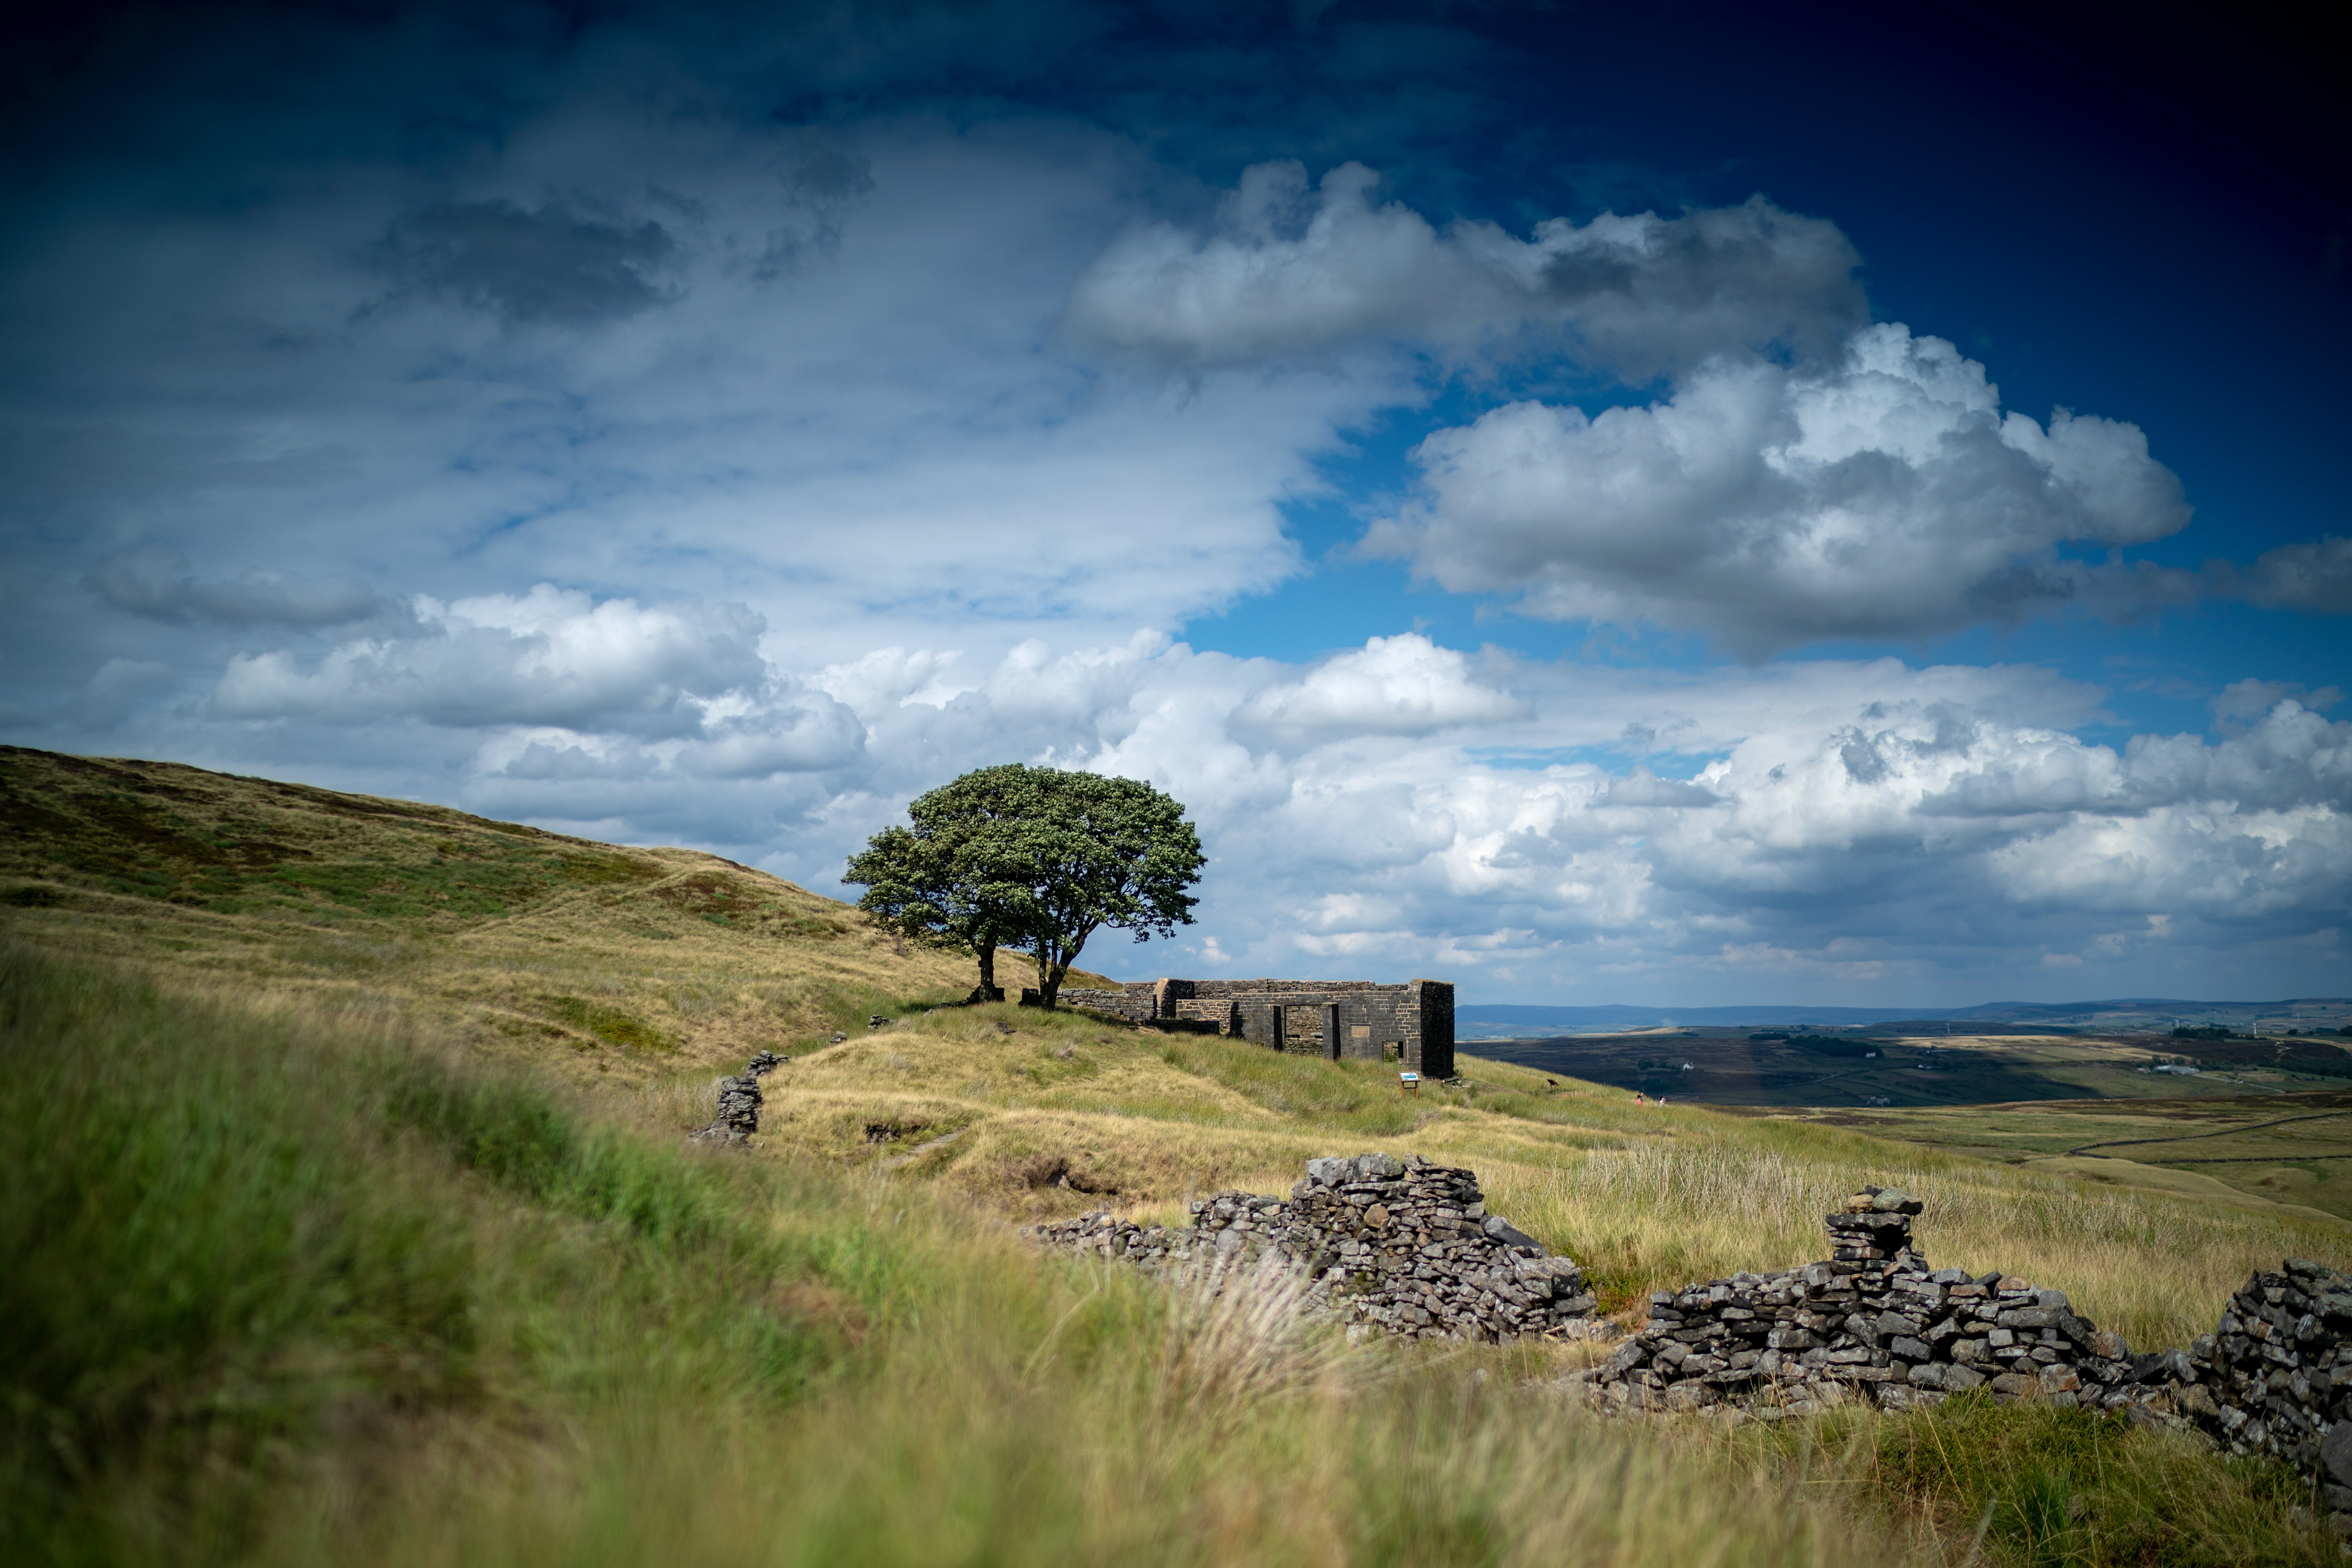 A view of the derelict Top Withins Farm House on the North Yorkshire moors near Haworth, believed to be the setting for ‘Wuthering Heights’